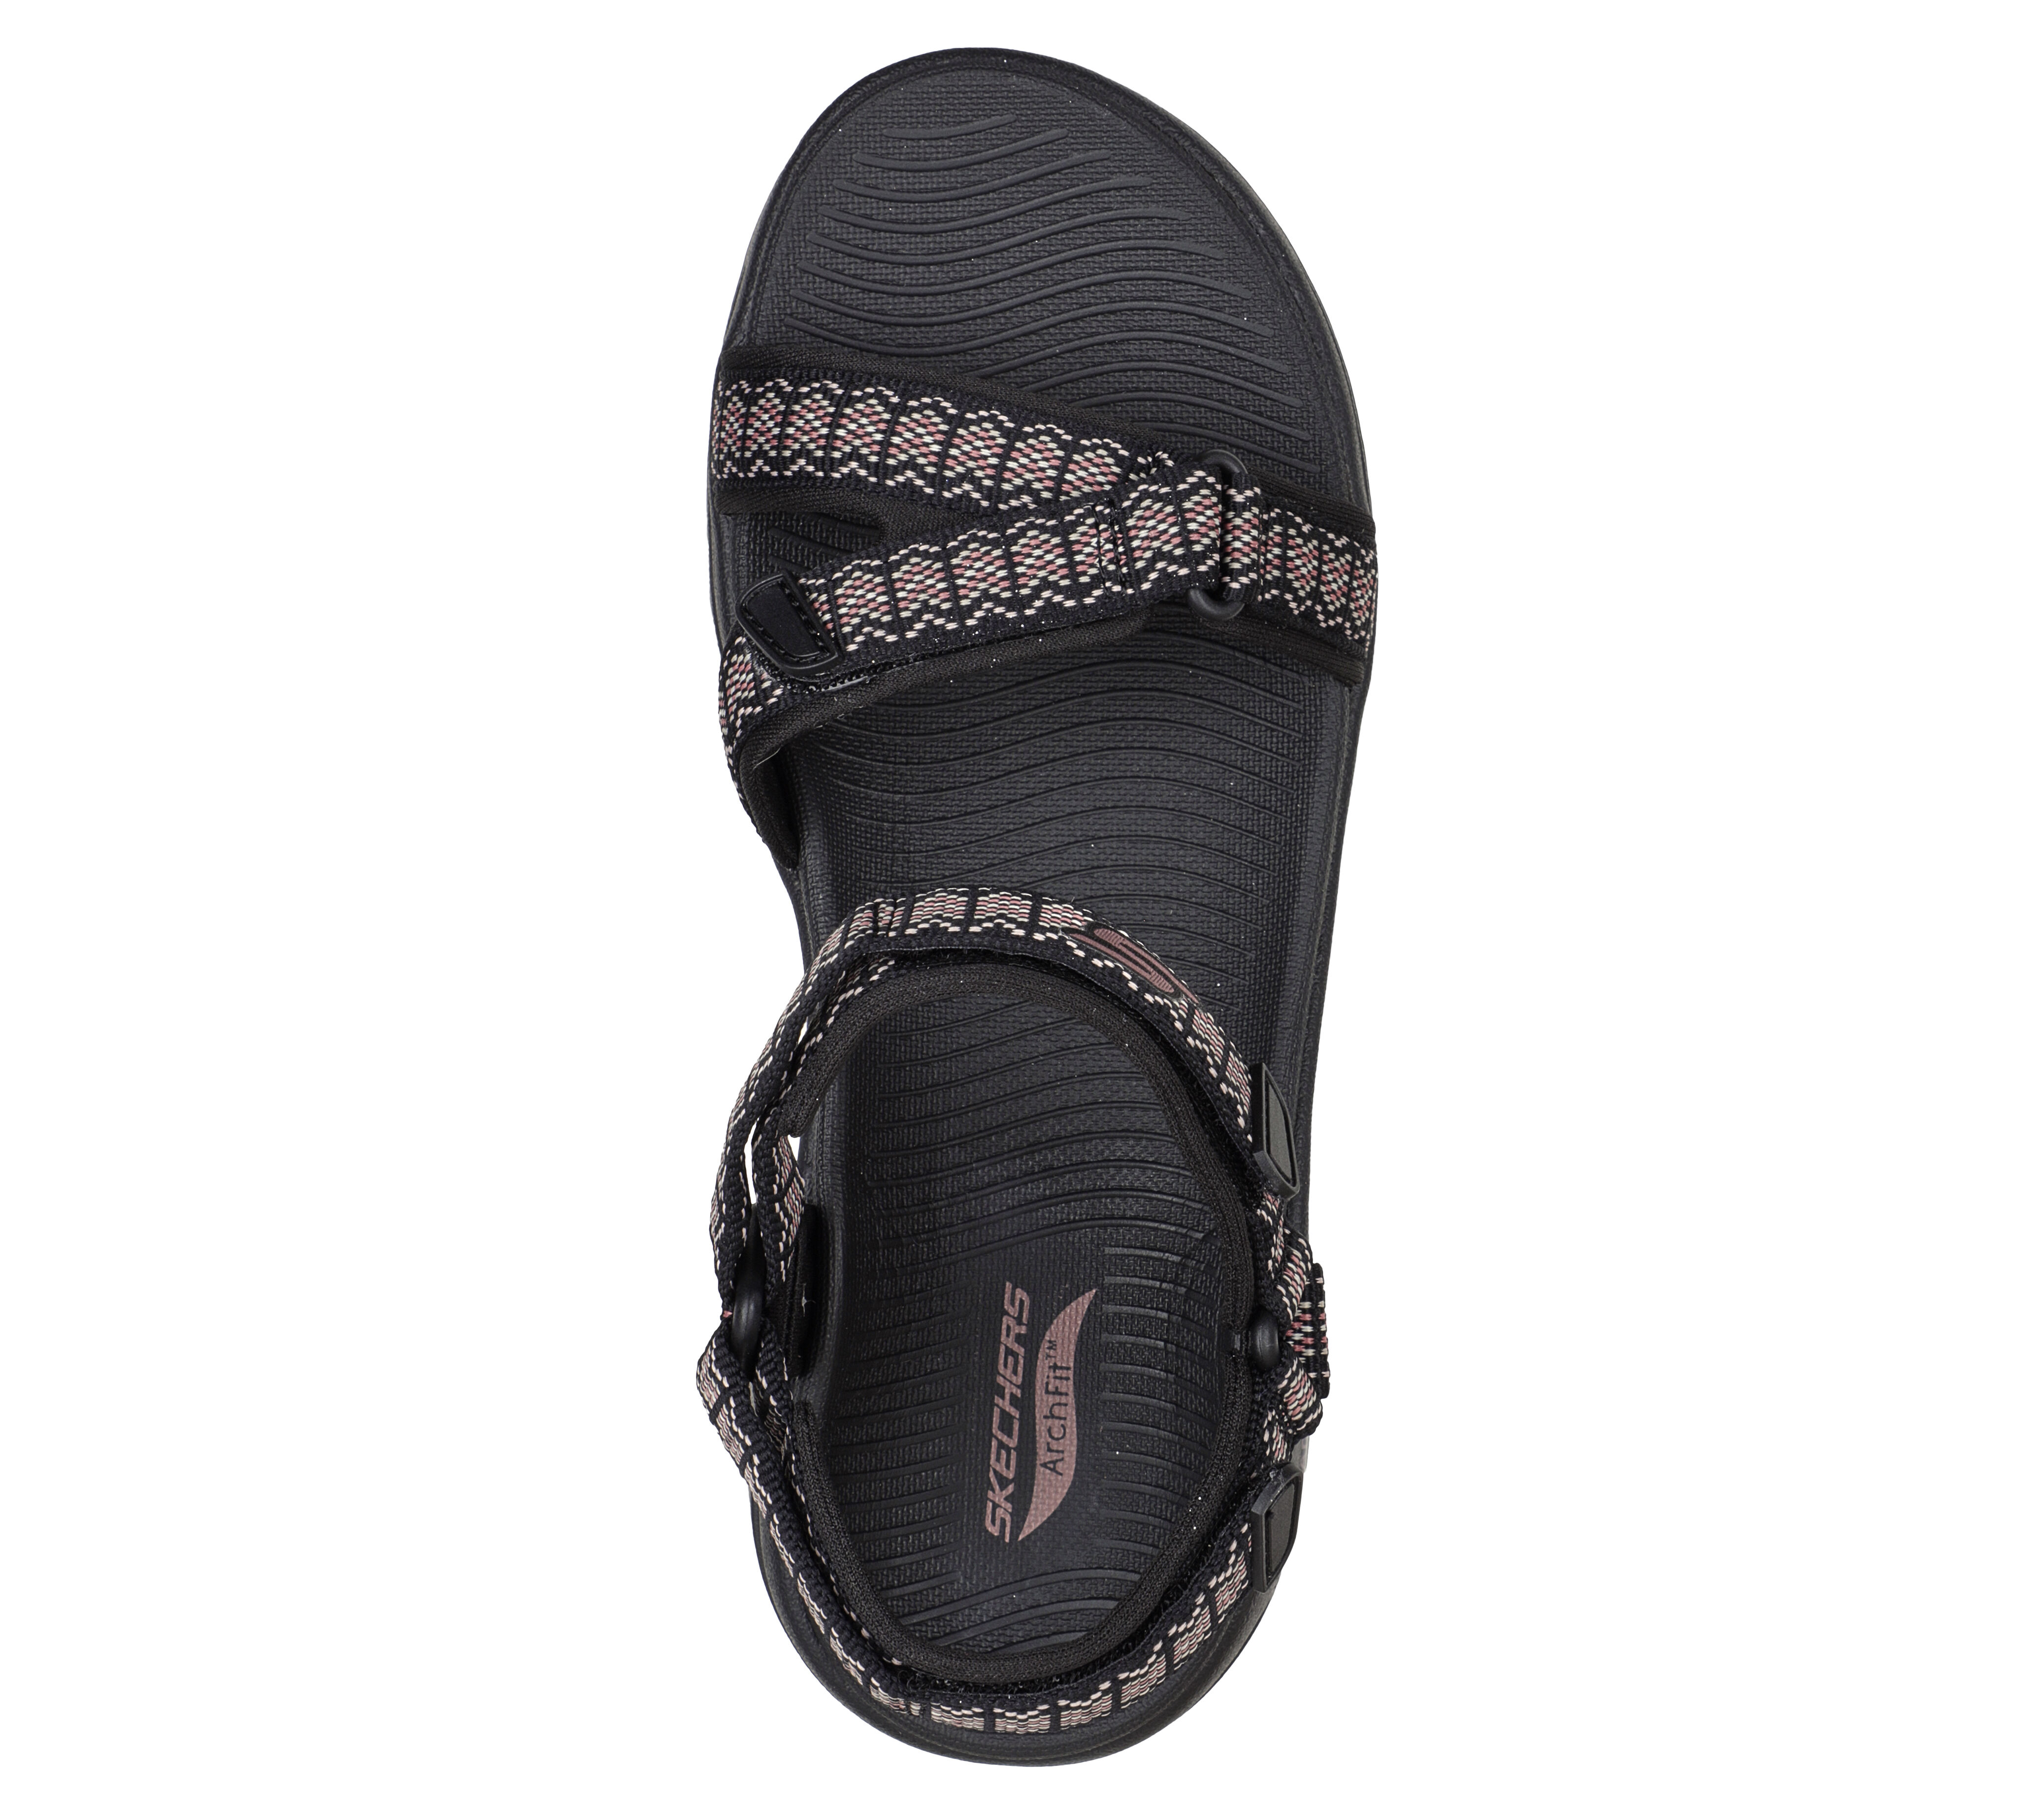 Skechers GO WALK Arch Fit - Affinity